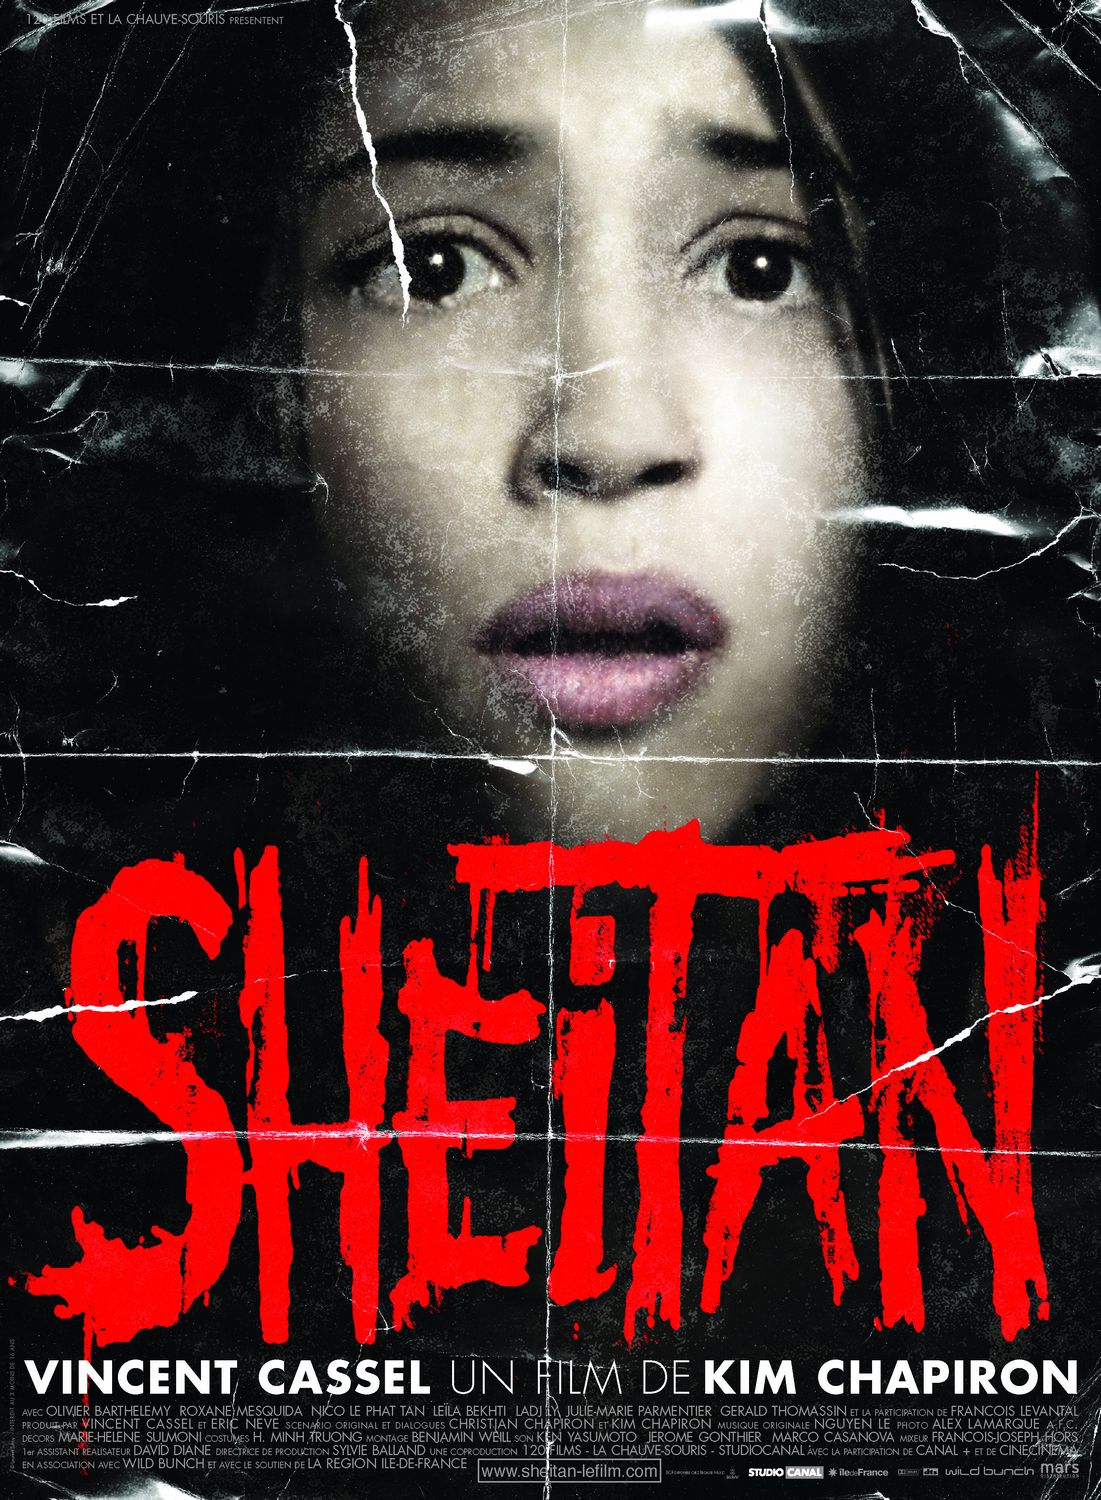 Extra Large Movie Poster Image for Sheitan (#3 of 5)